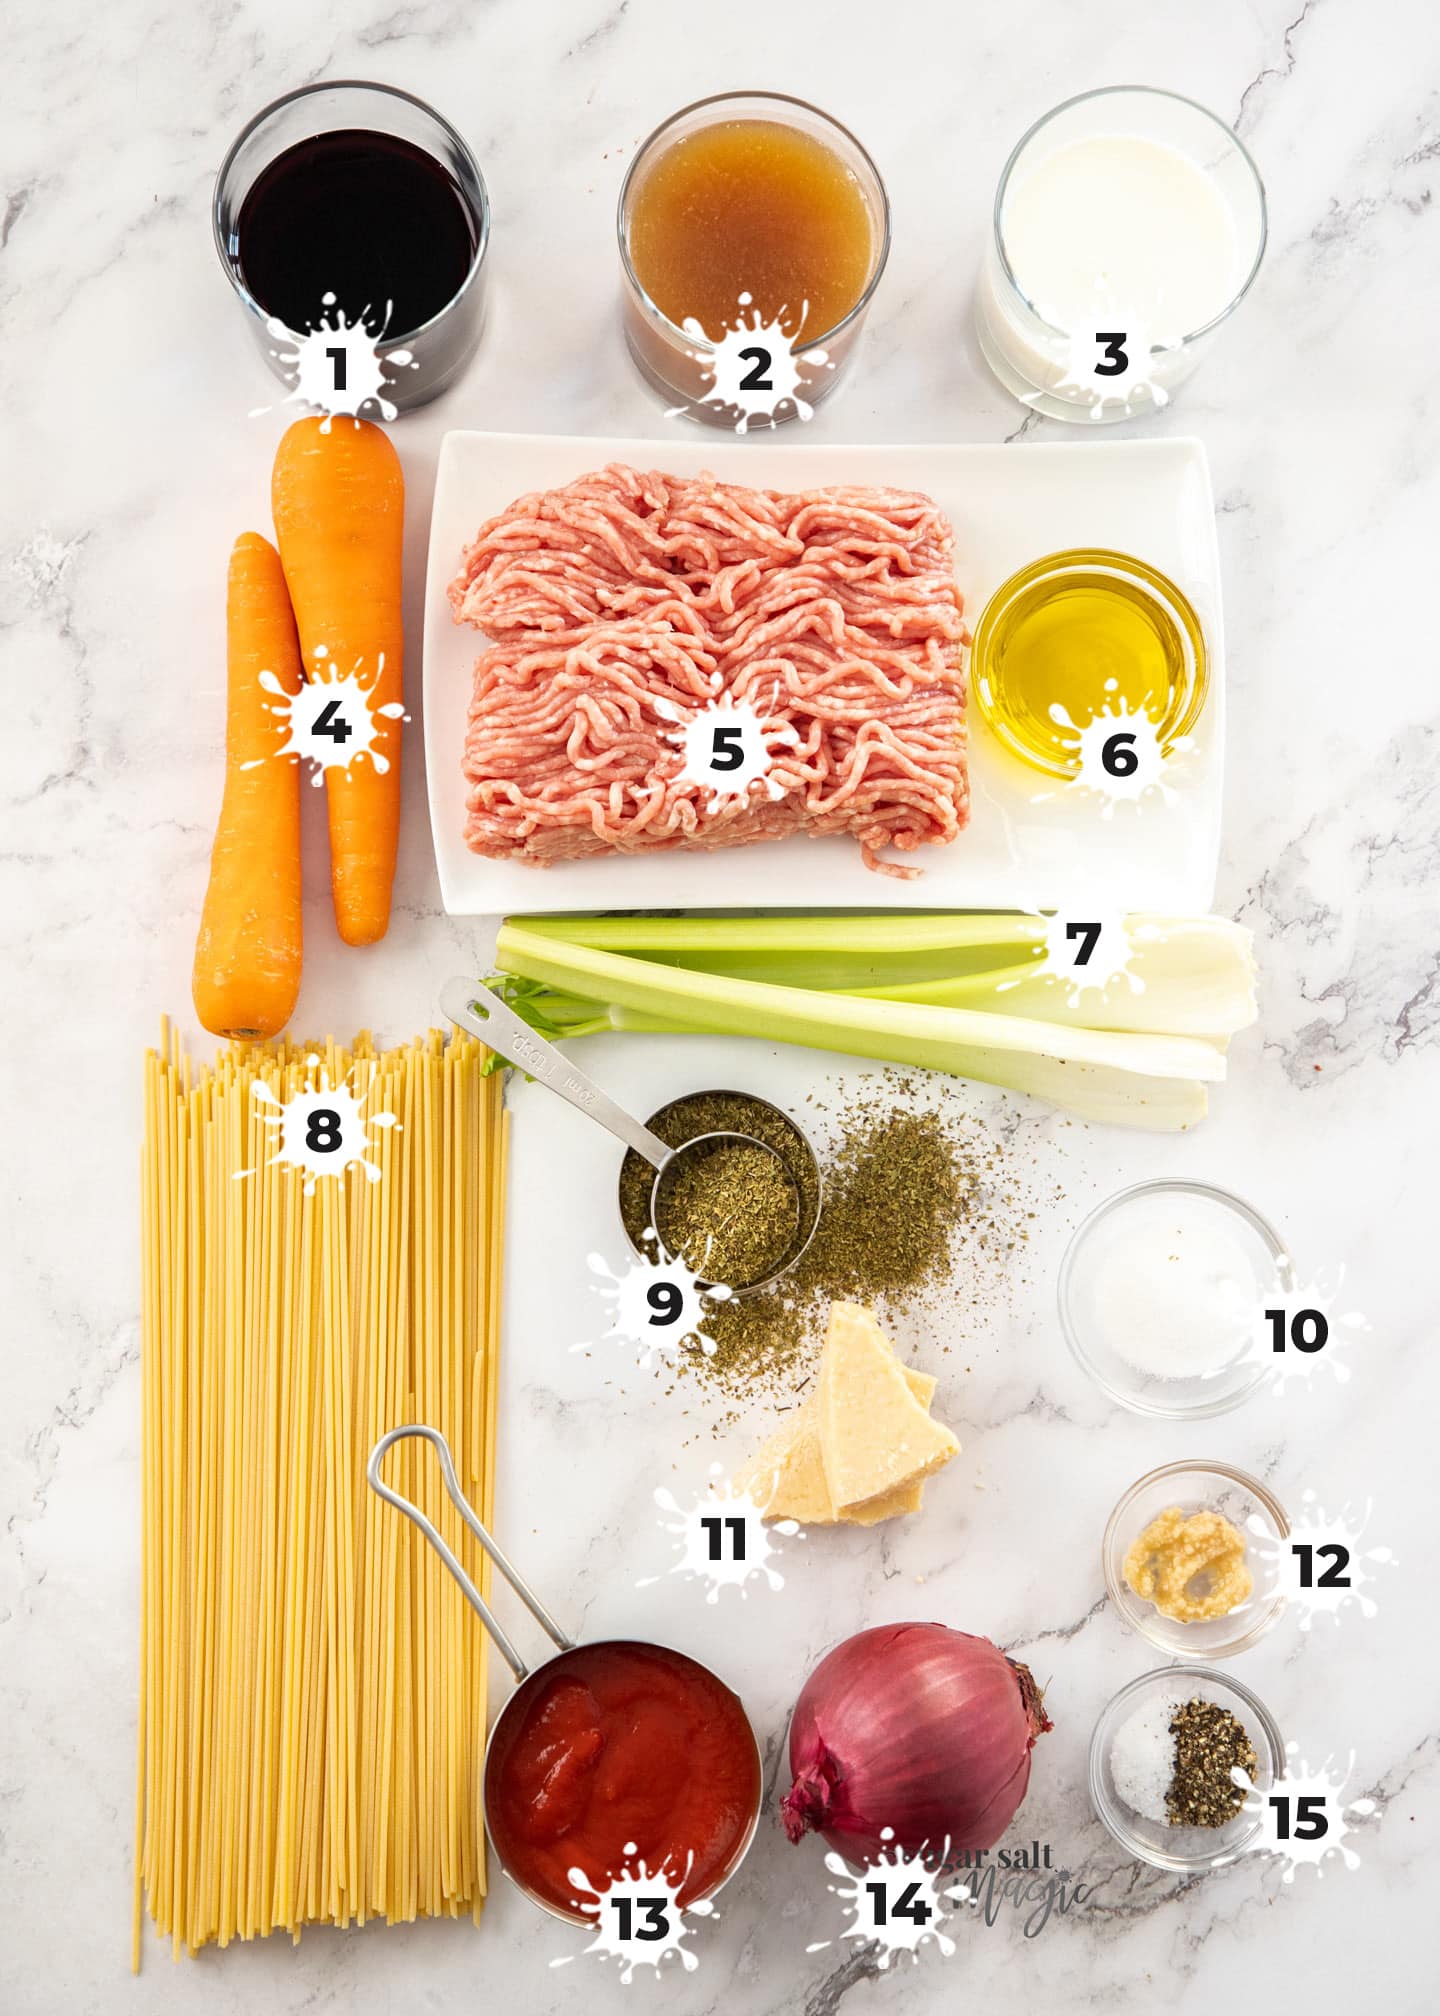 Ingredients for spaghetti bolognese on a marble worktop